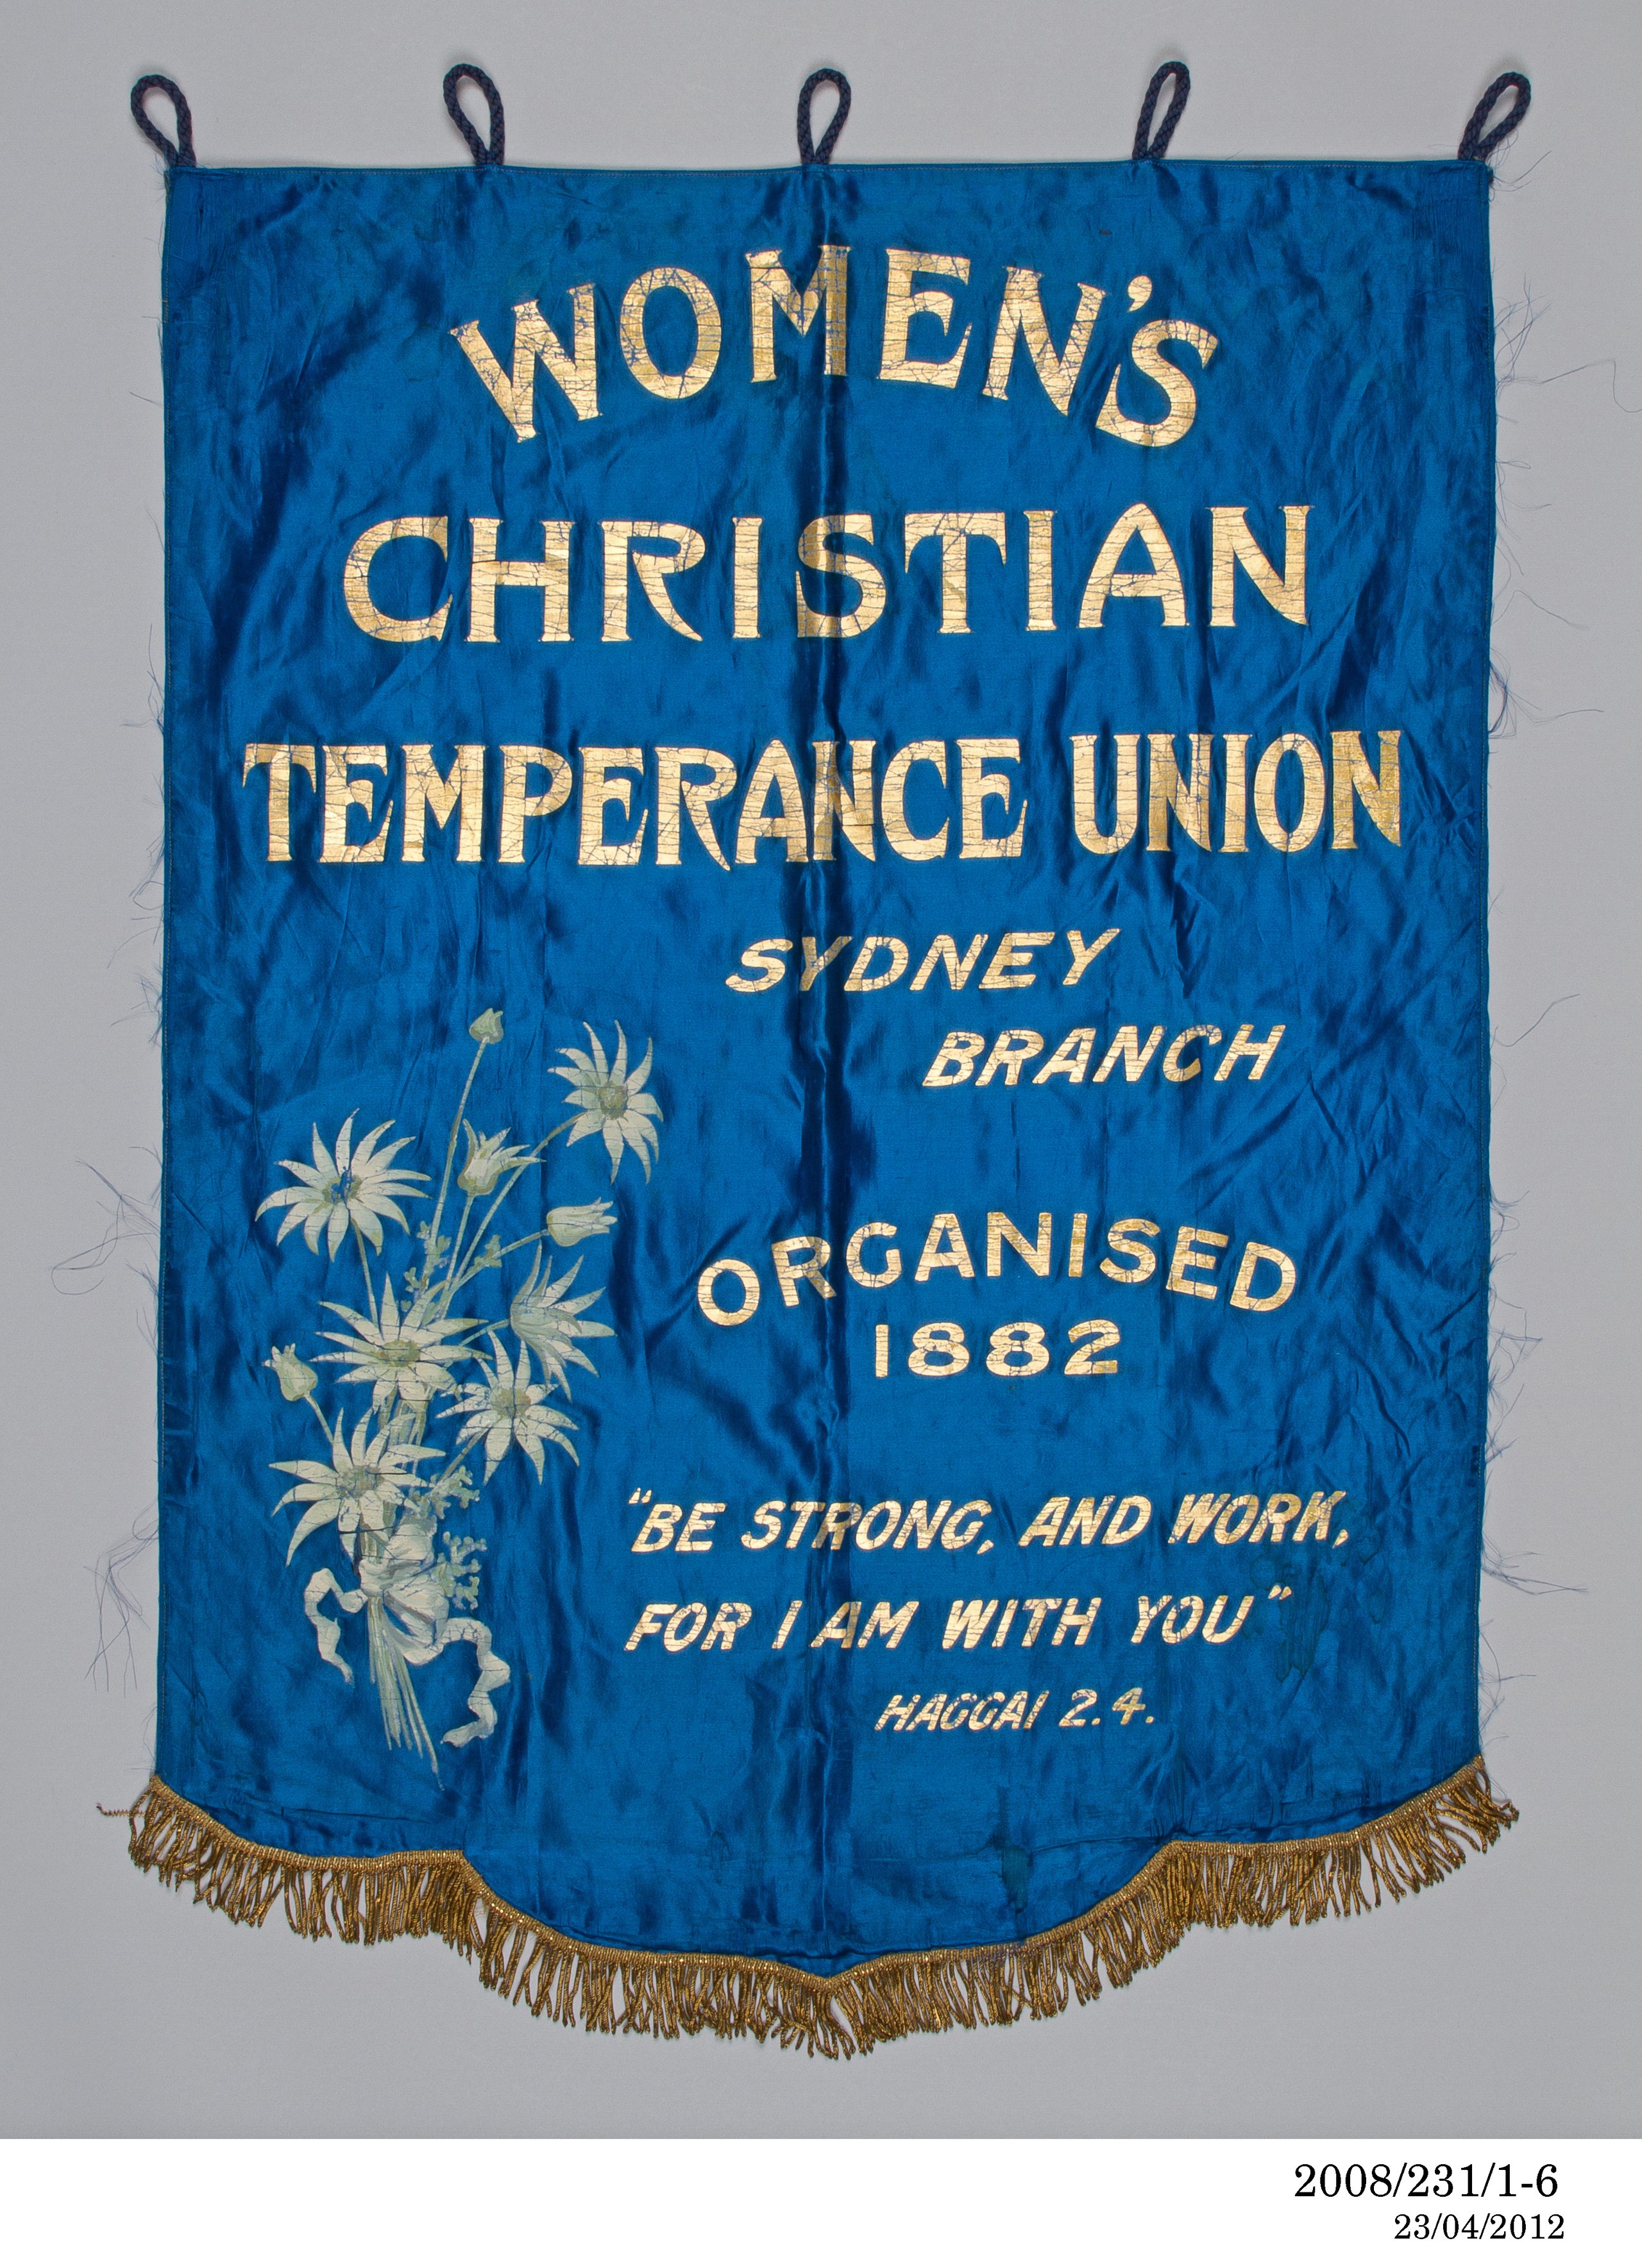 Collection from the NSW Women's Christian Temperance Union